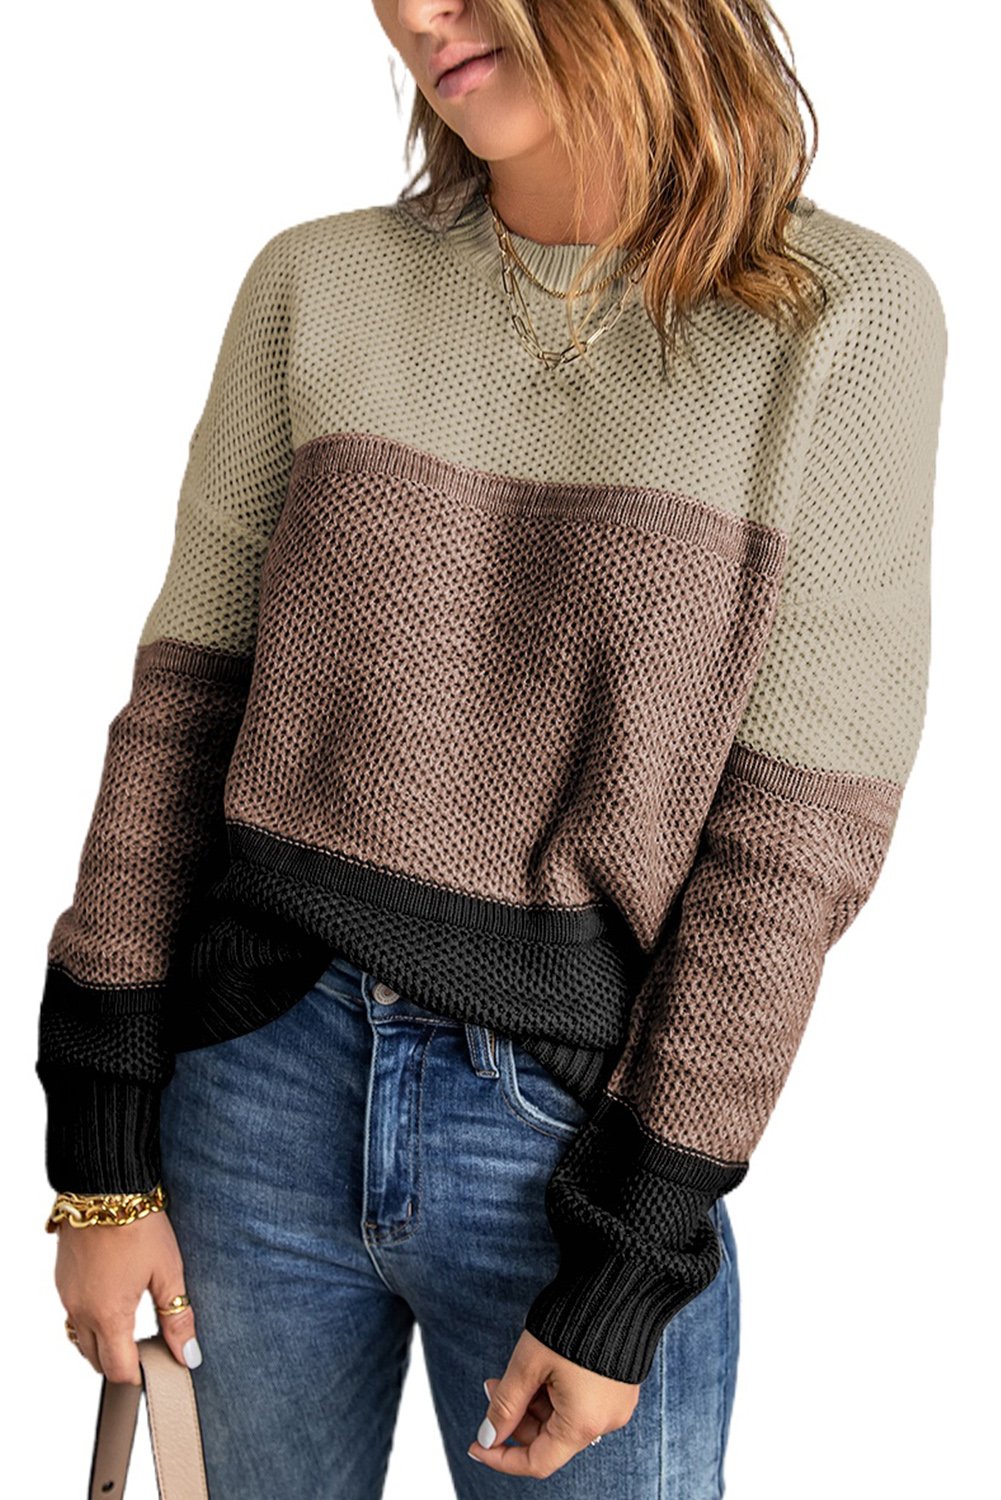 Comfy Khaki Color Block Netted Texture Pullover Sweater